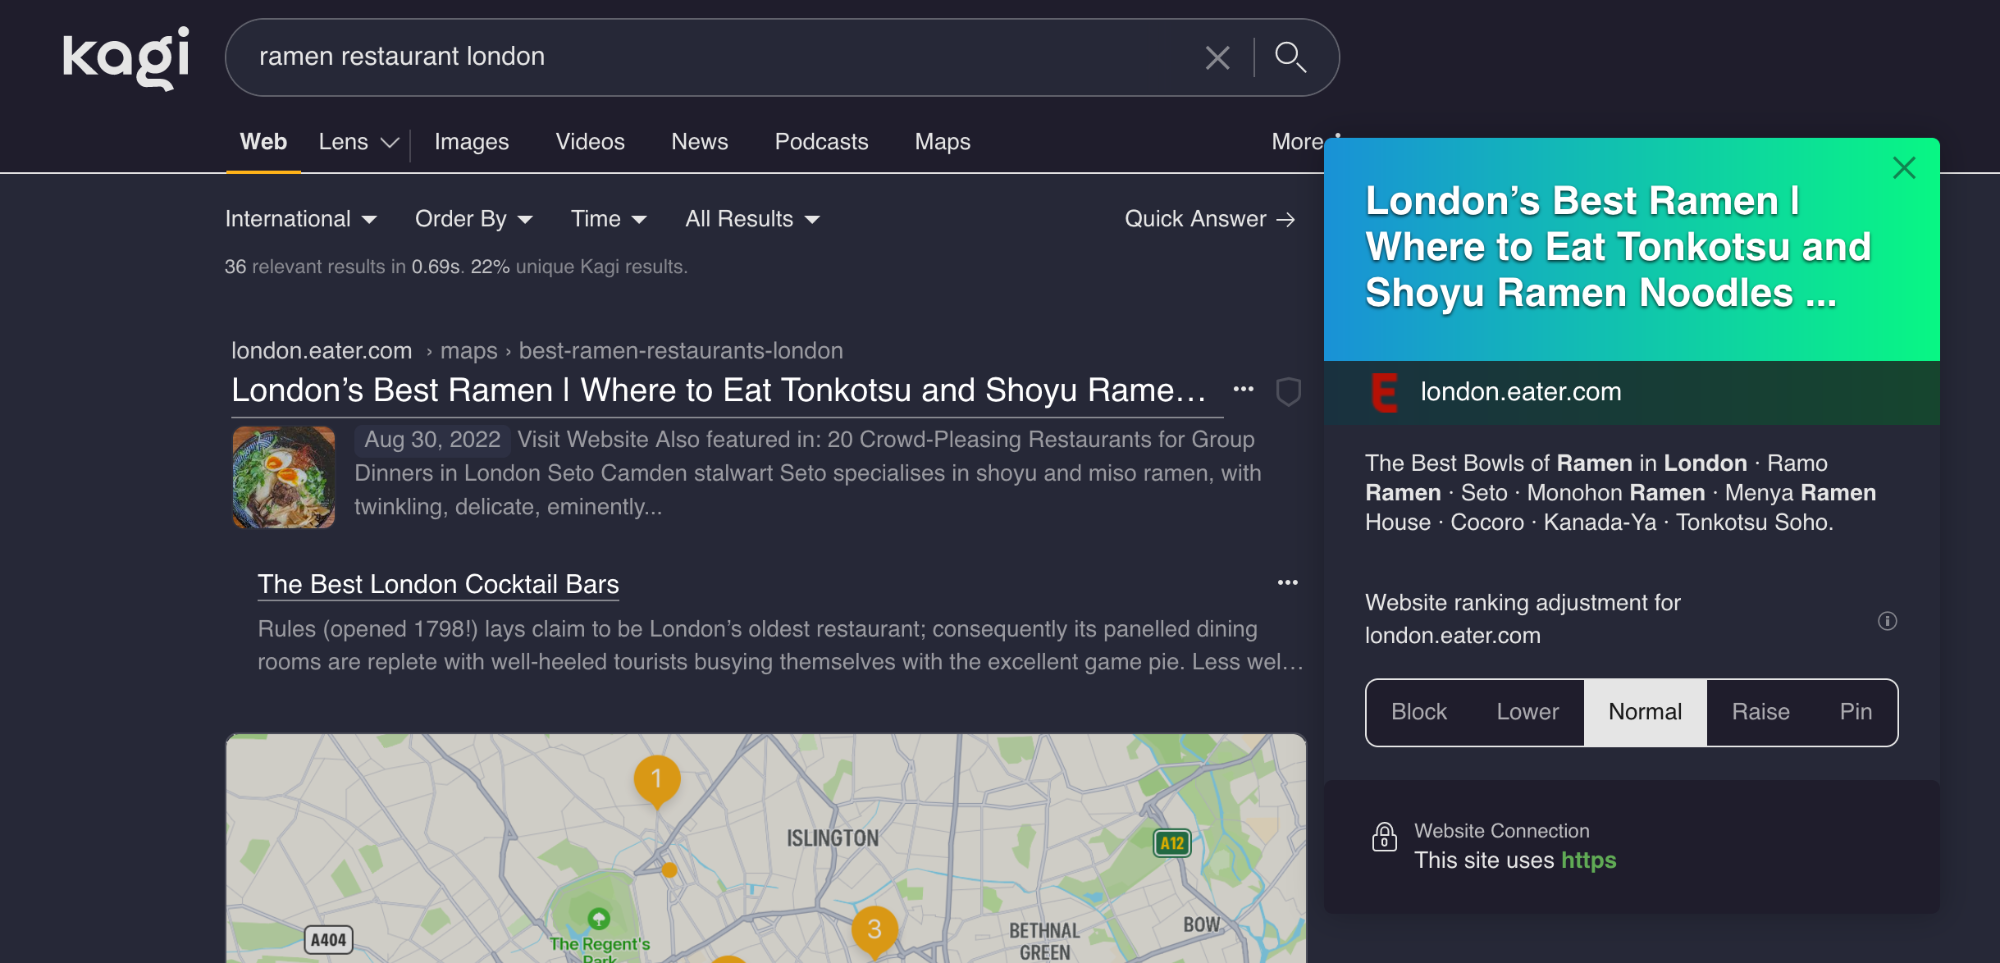 The Kagi website showing a search for ramen restaurant london. Next to the first result is an overlay which shows controls for adjusting the ranking for that site (block, lower, normal, raise, pin).